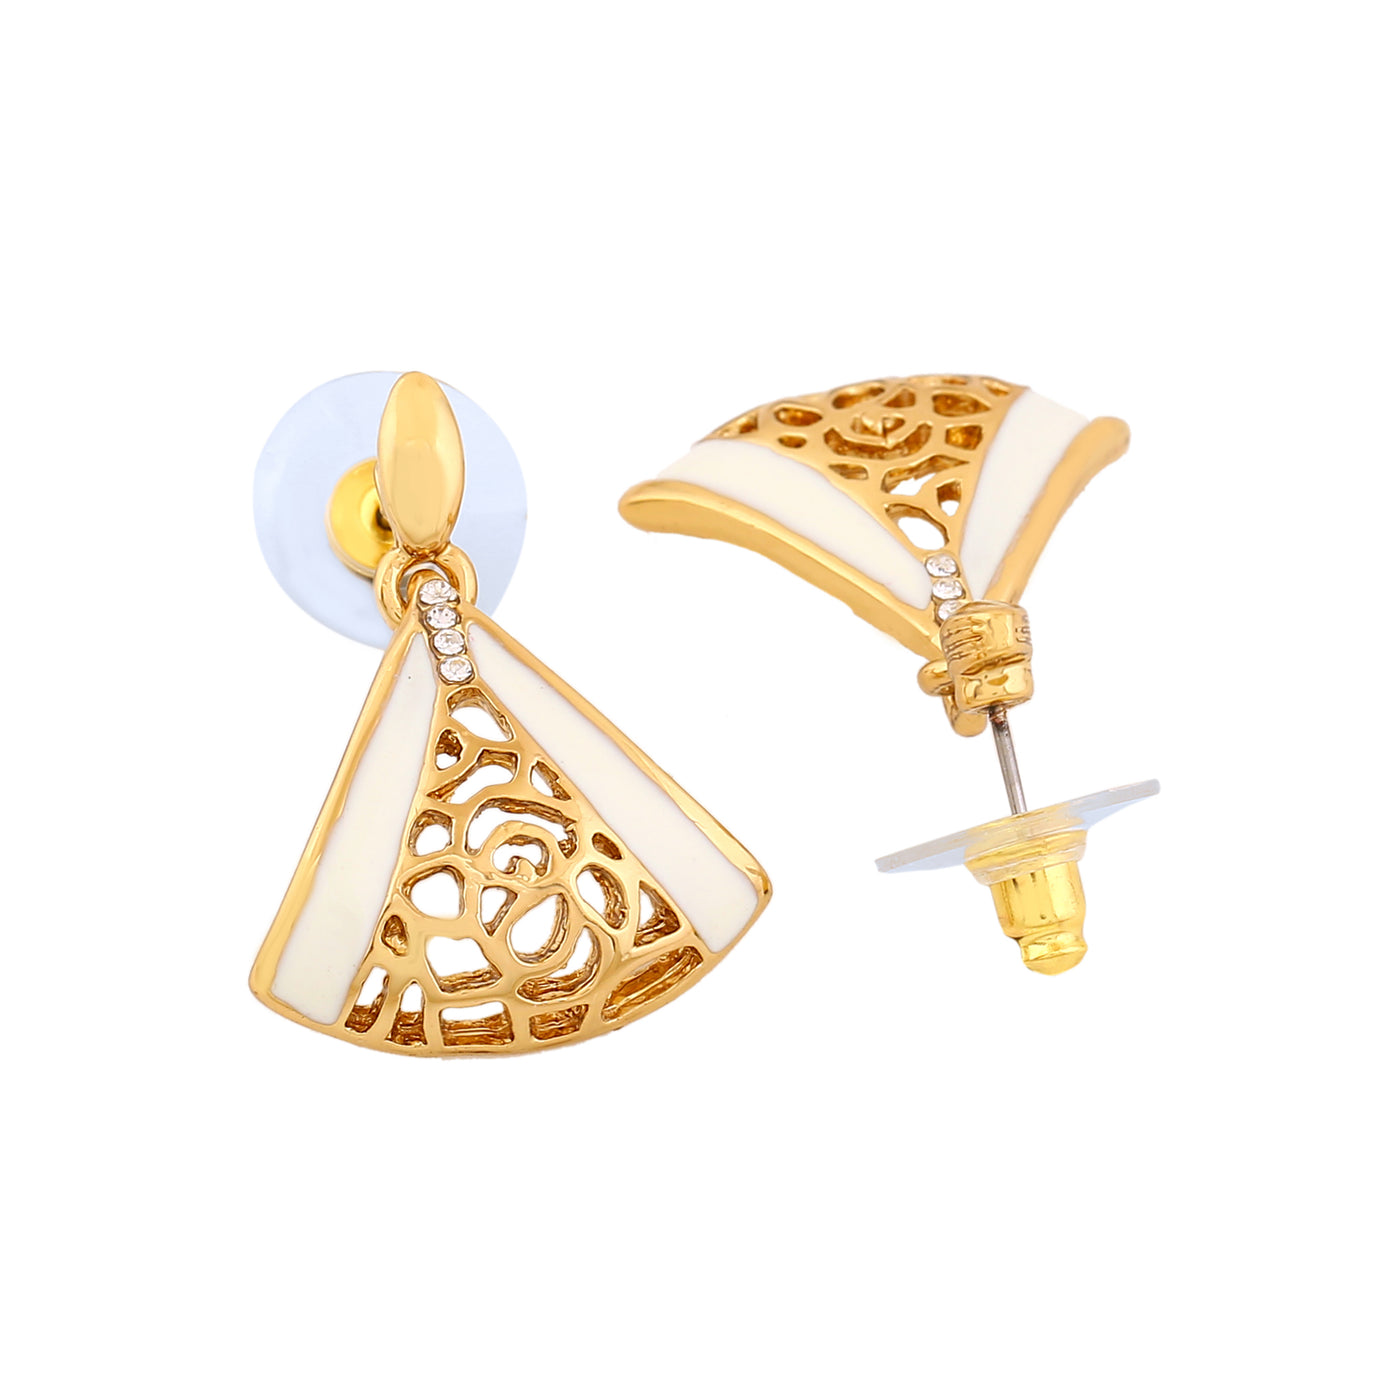 Estele Gold Plated Glorious Earrings with Crystals for Women